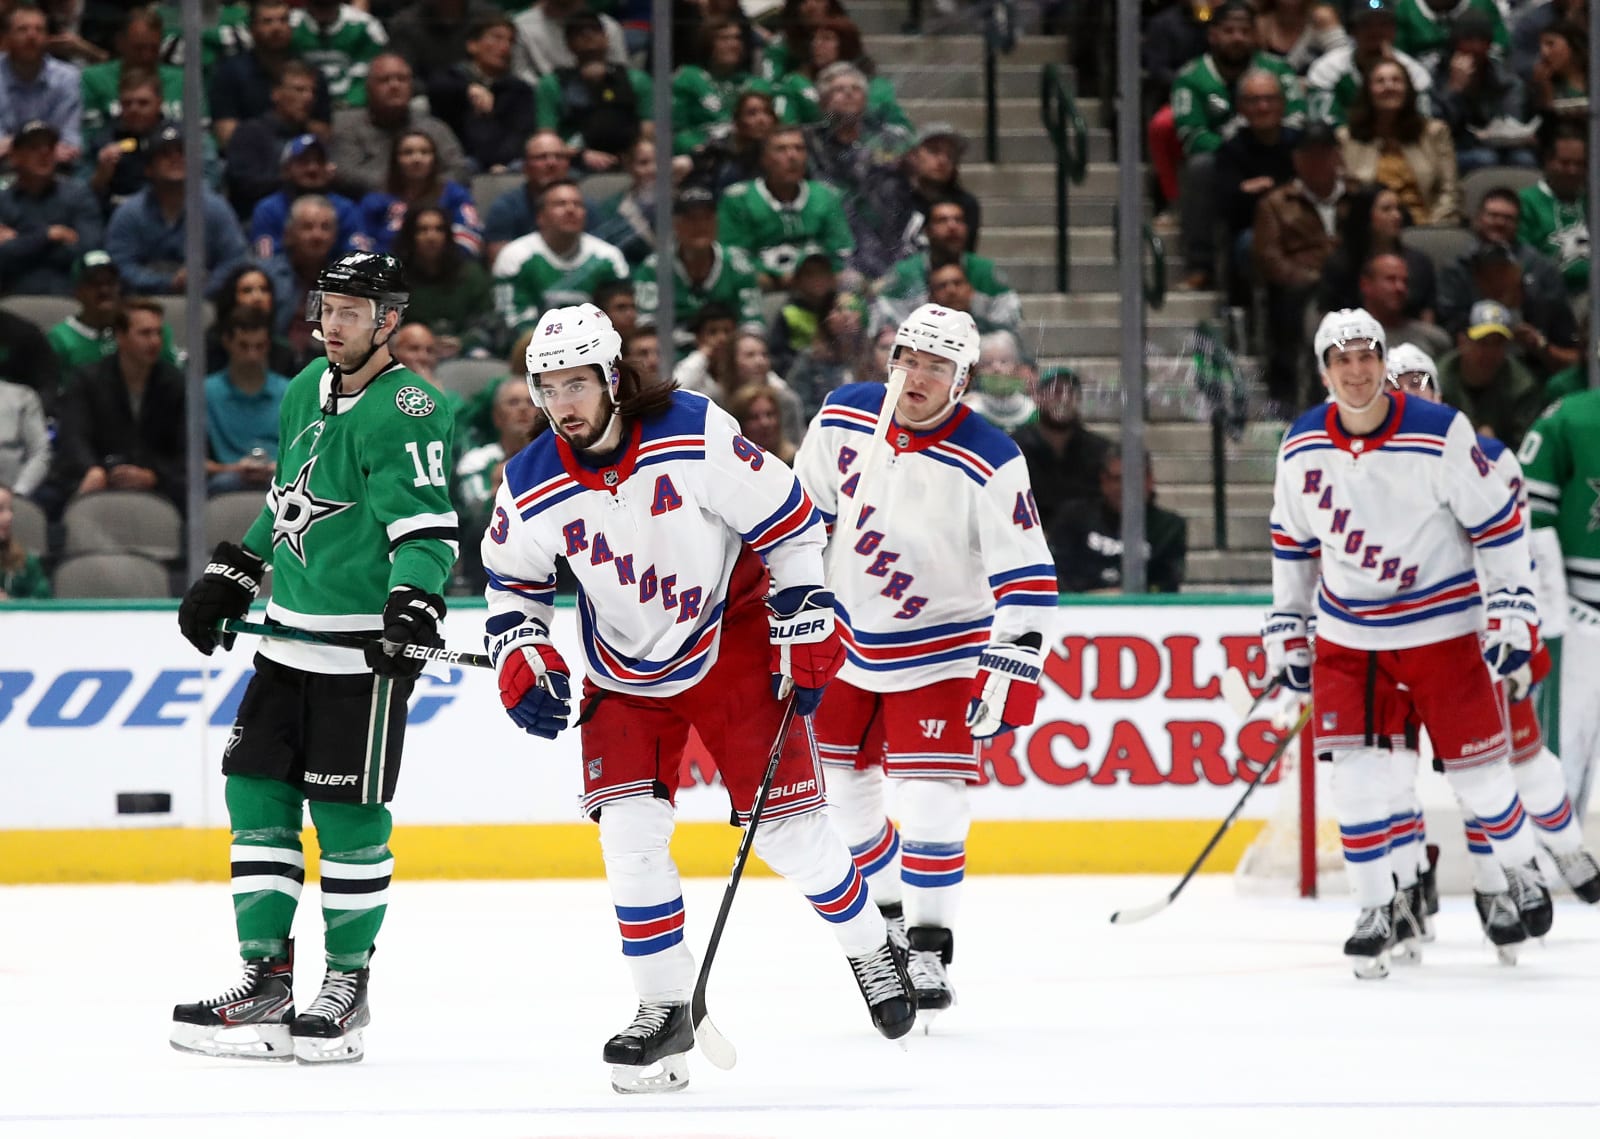 New York Rangers The playoff race tightens with a big road win in Dallas